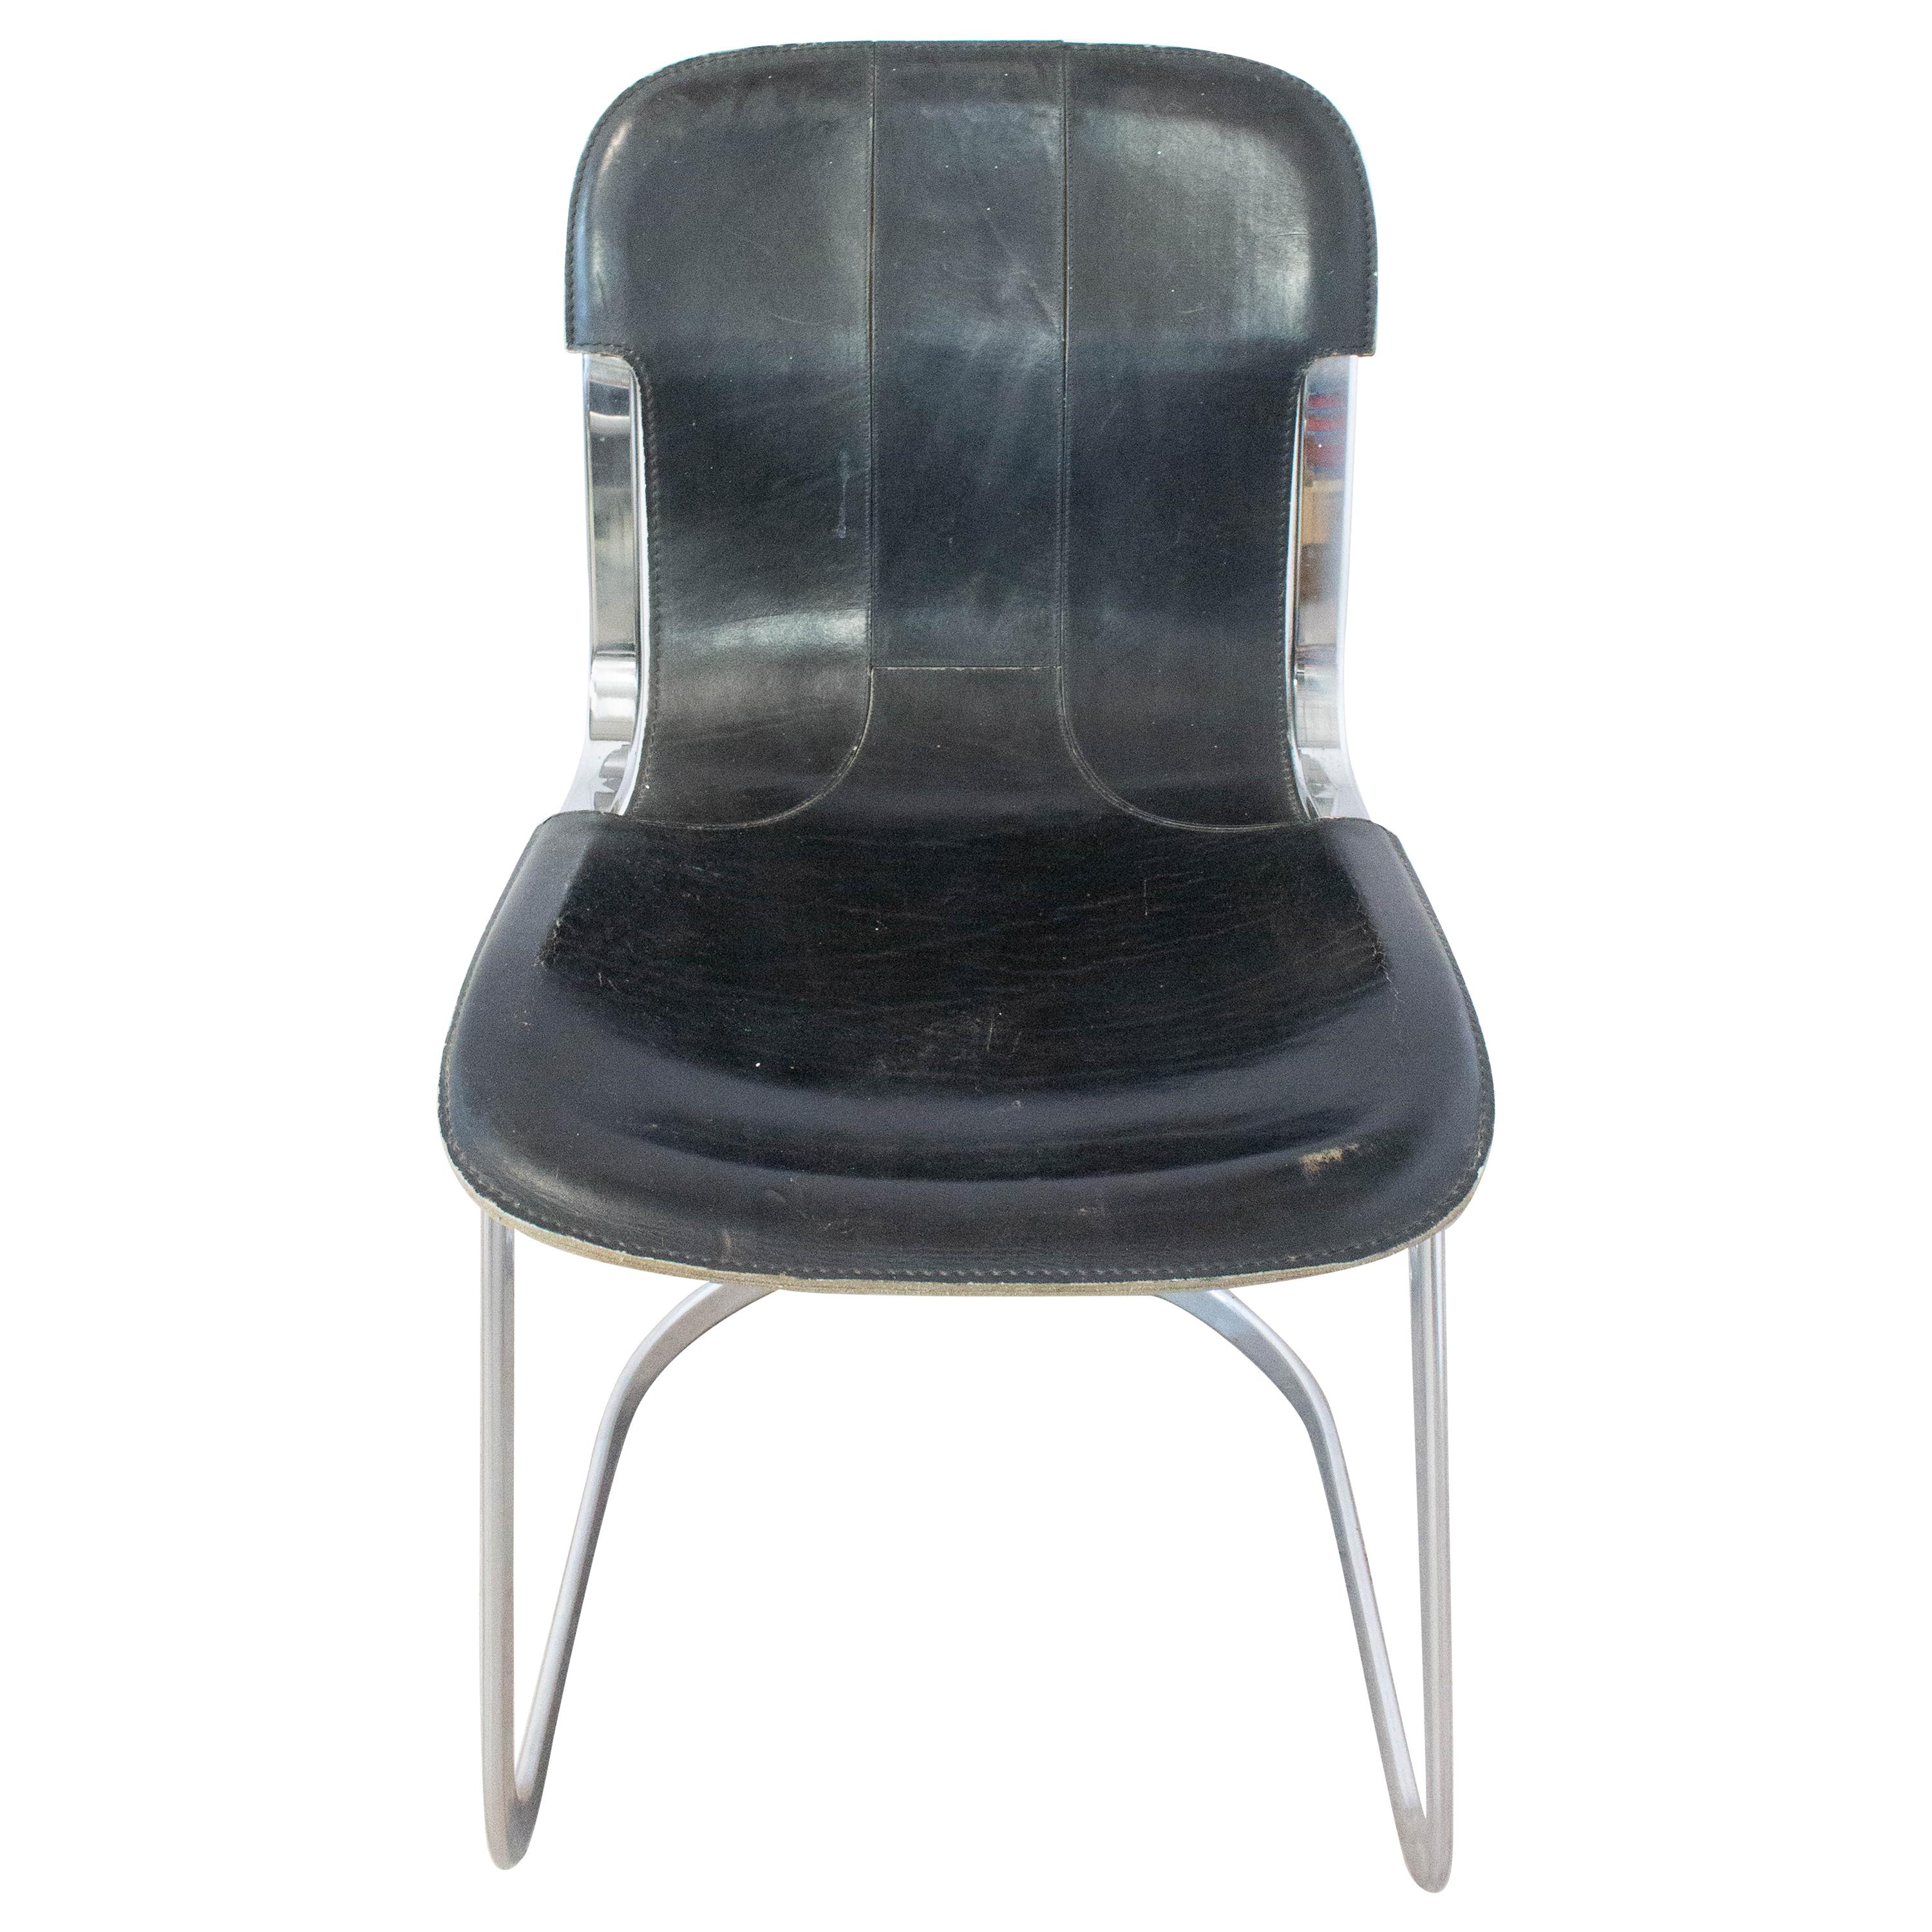 Chair Willy Rizzo Black Leather Chrome N2, circa 1970